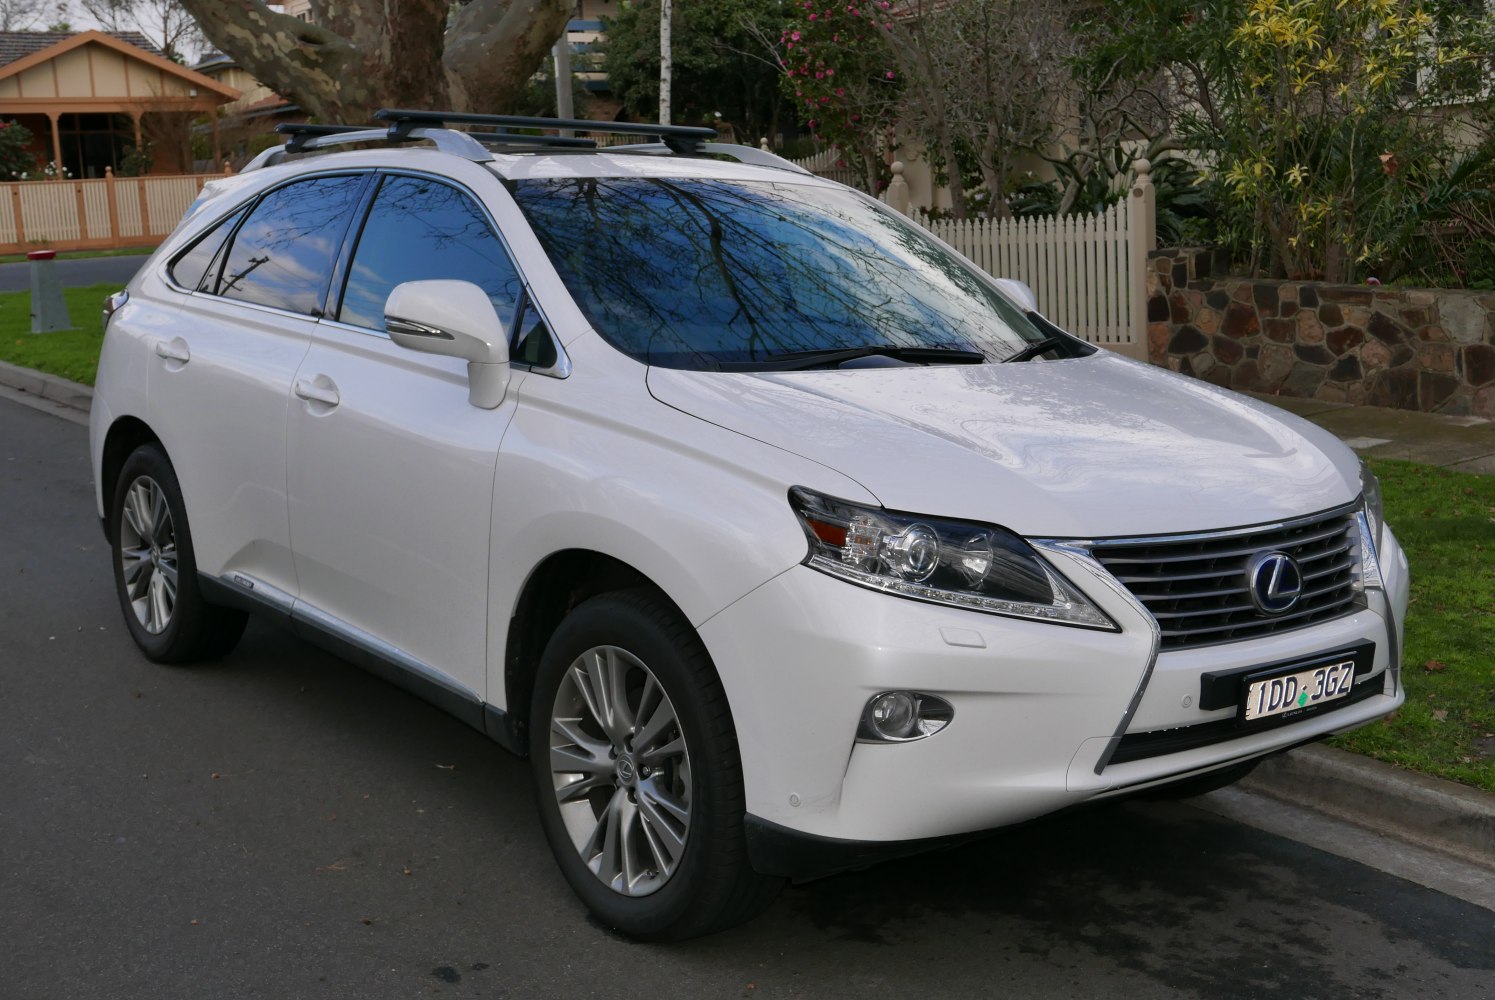 https://totalrenting.es/wp-content/uploads/2022/10/lexus-rx-iii-facelift-2012-2012-270-188-cv-automatic-suv.png